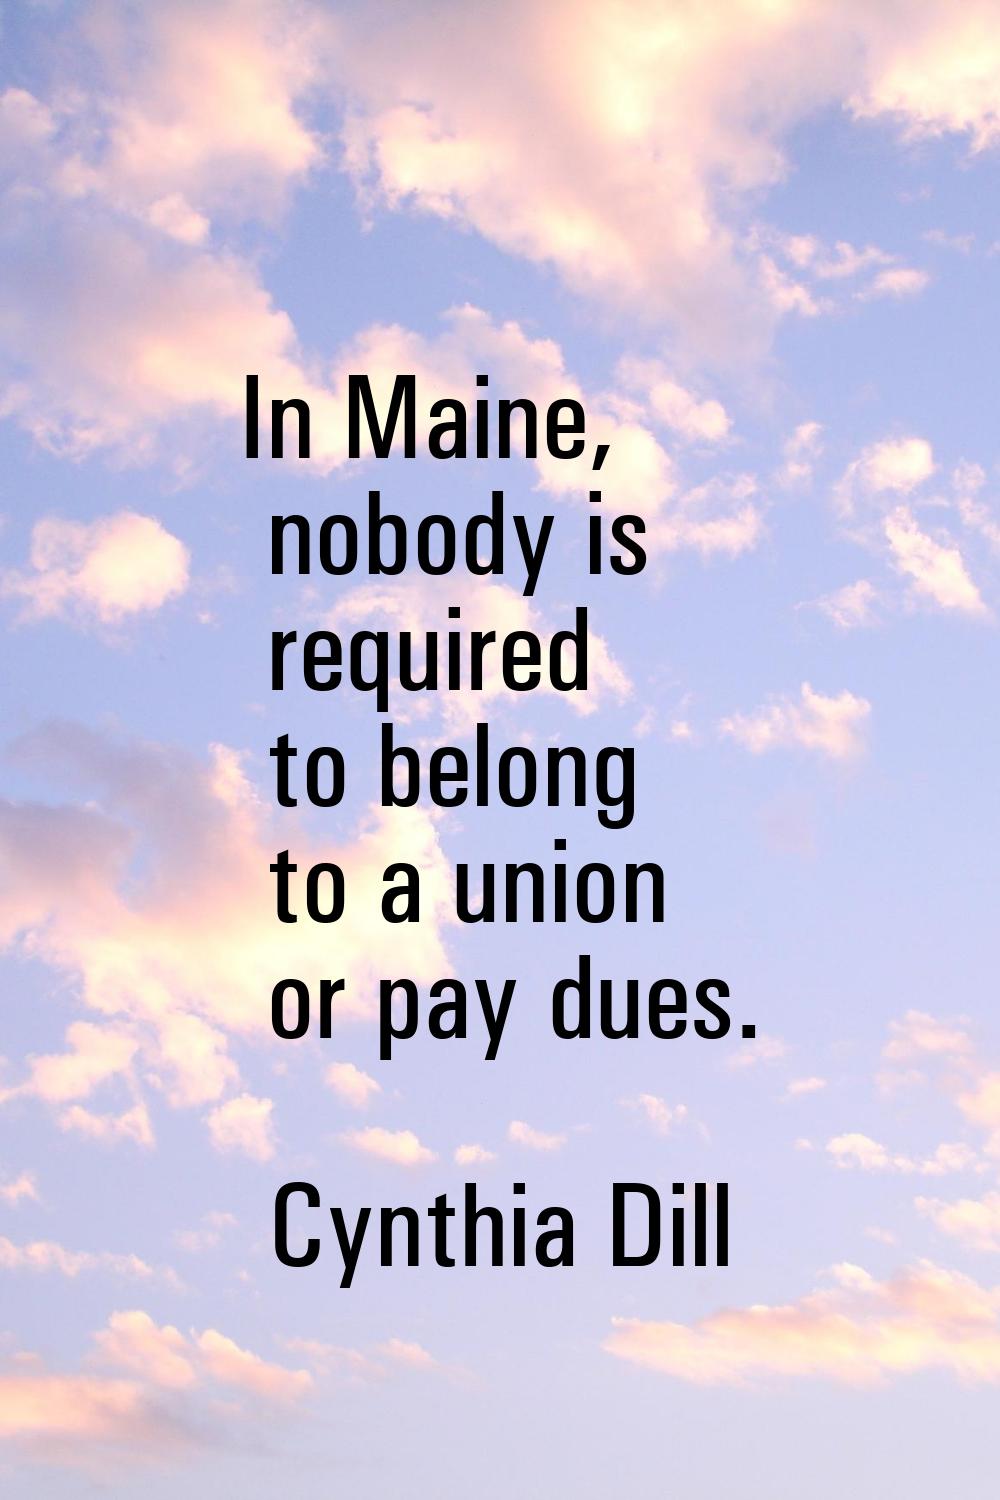 In Maine, nobody is required to belong to a union or pay dues.